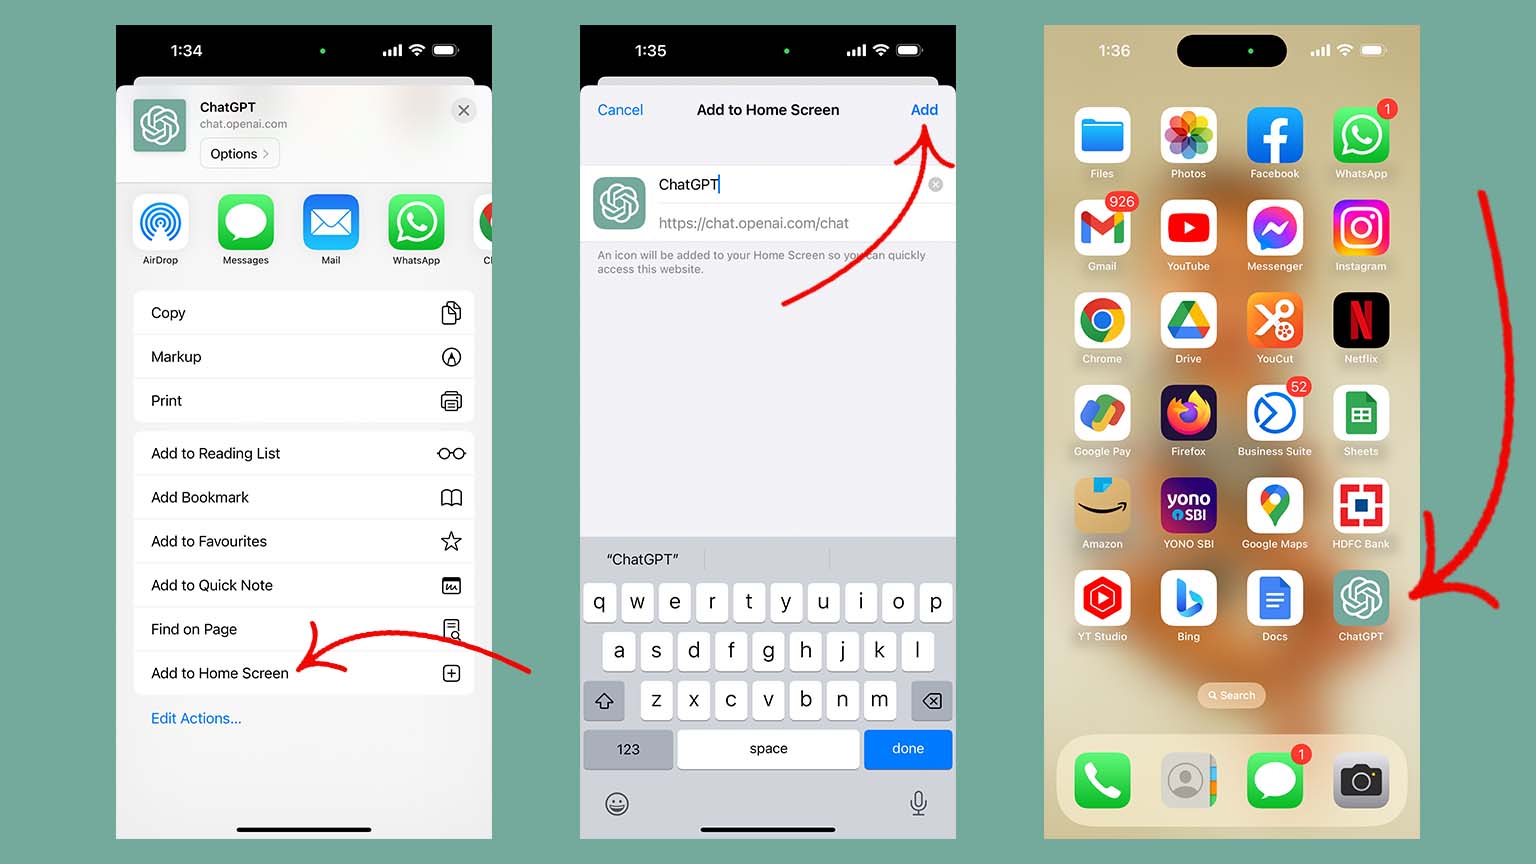 How to Use ChatGPT on iPhone via Creating a Shortcut